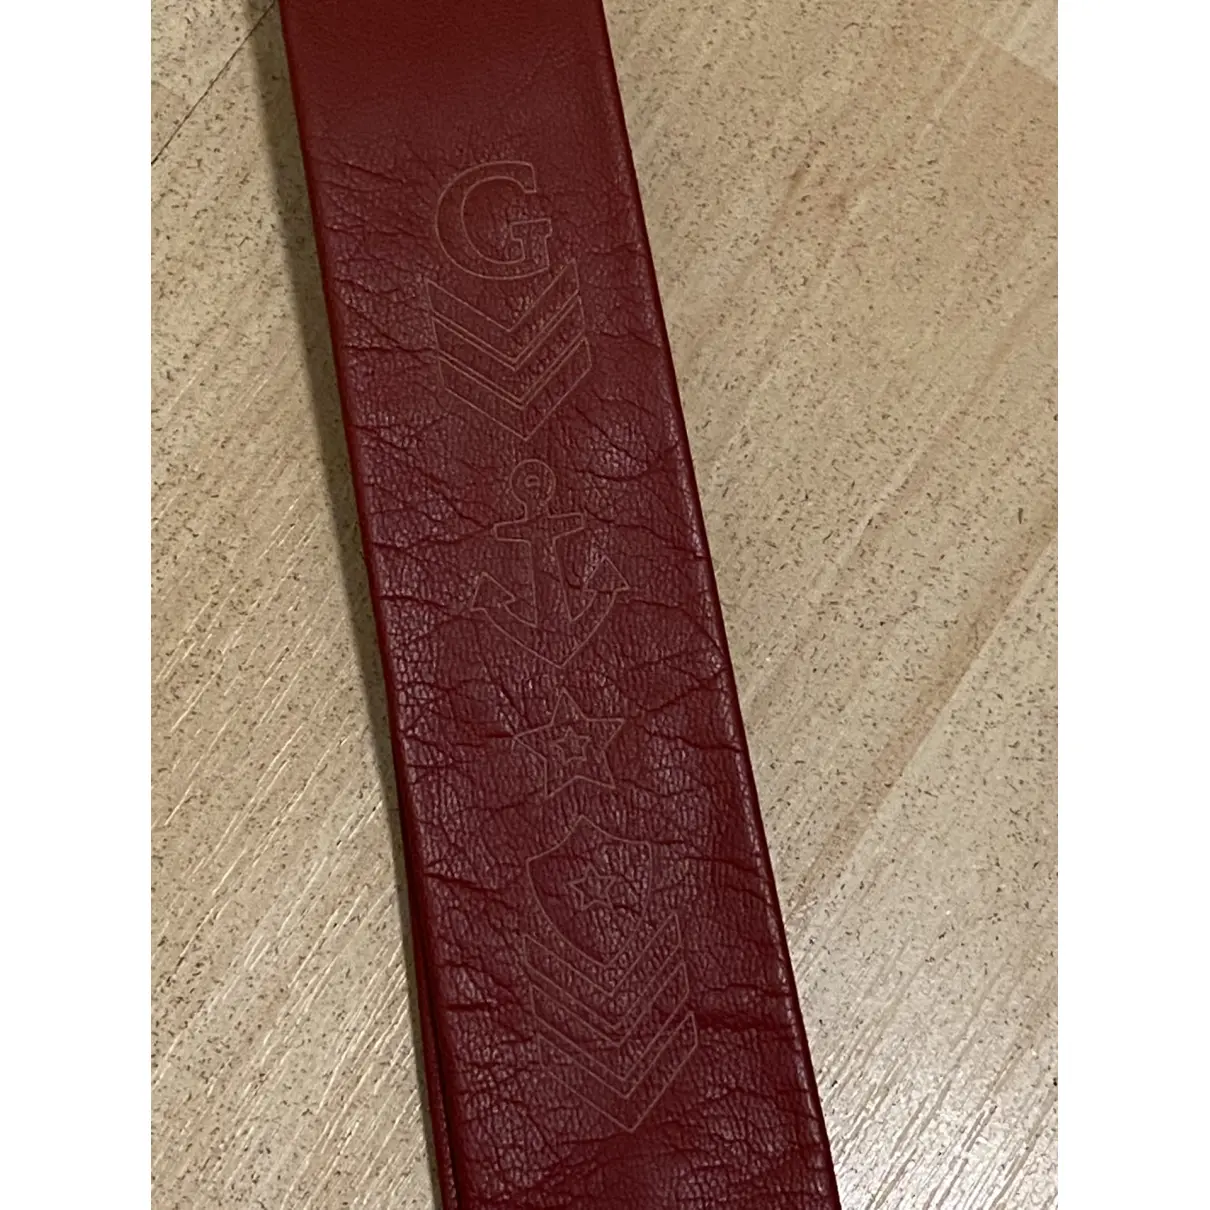 Buy Gucci Leather tie online